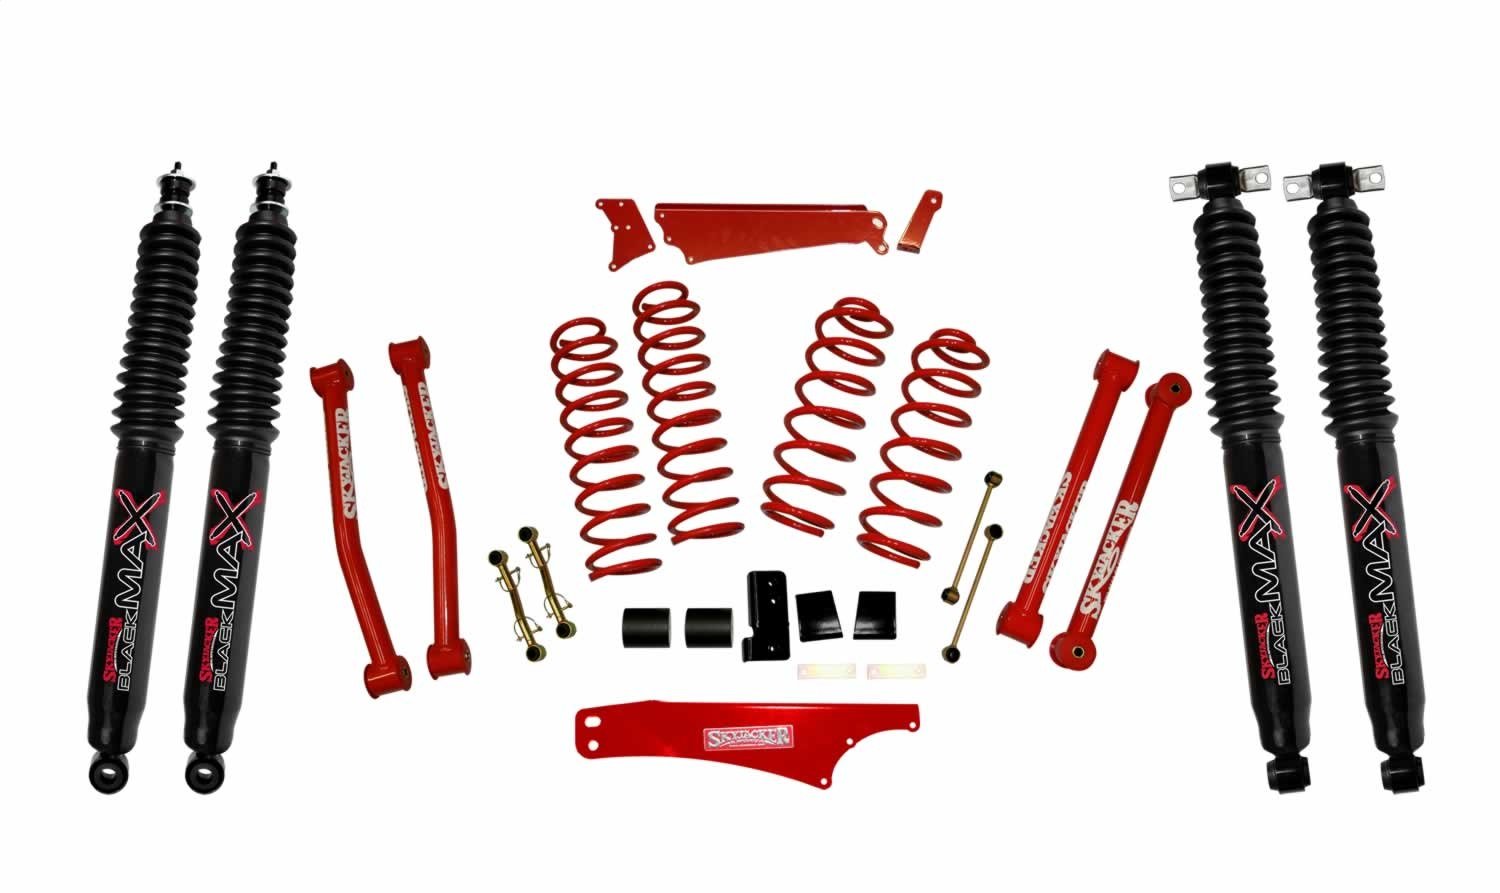 JK401KCR-B Front and Rear Suspension Lift Kit, Lift Amount: 4-5 in. Front/4-5 in. Rear